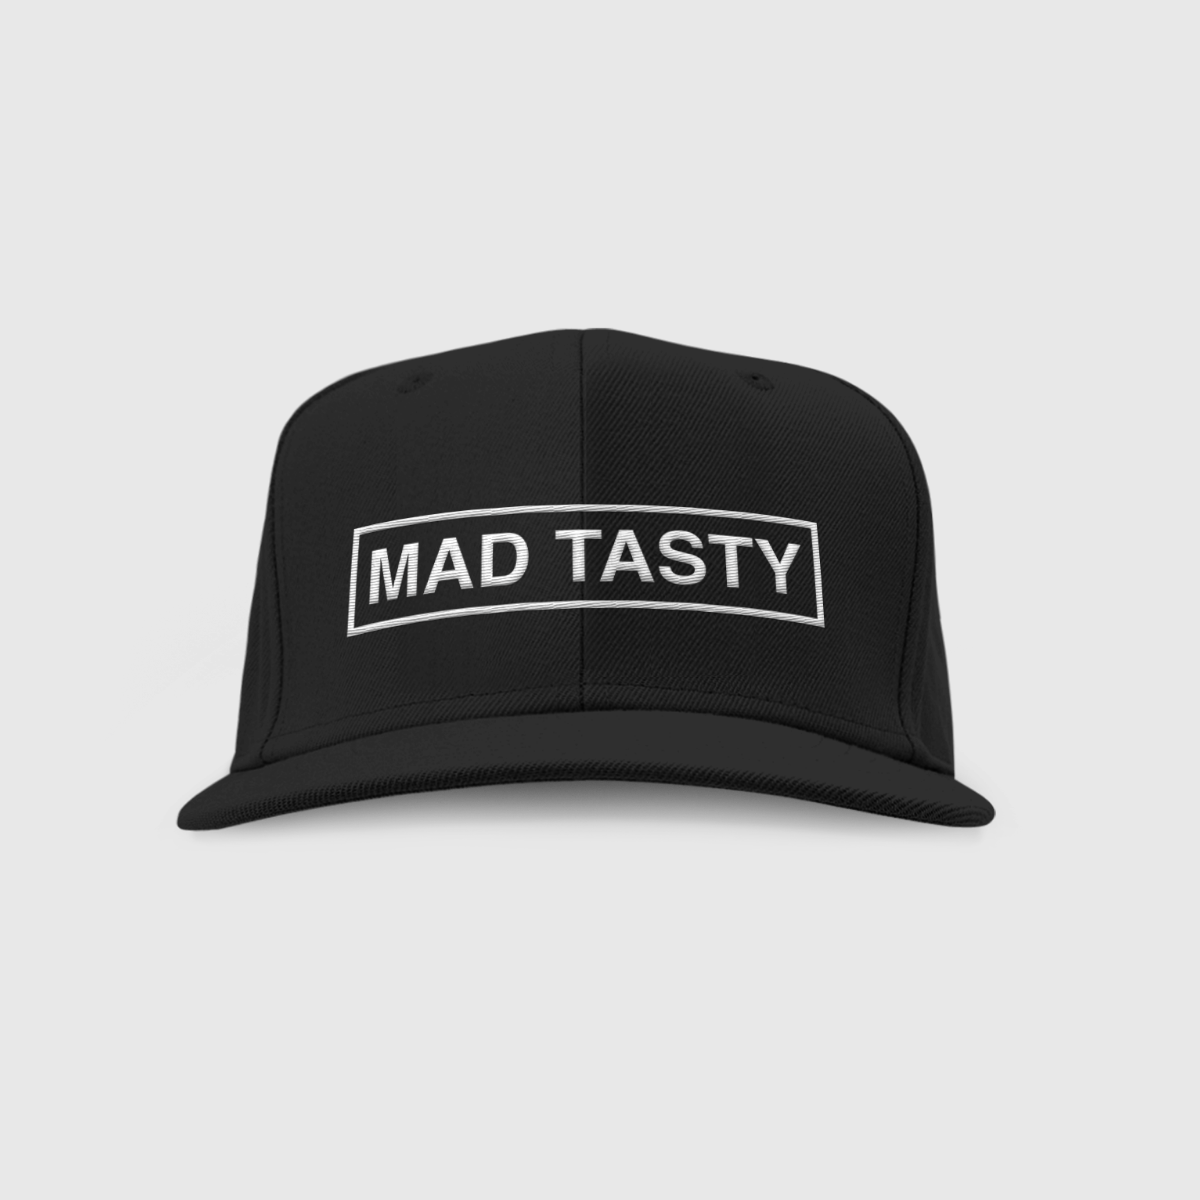 Baseball hat with MAD TASTY logo embroidered on front in white.